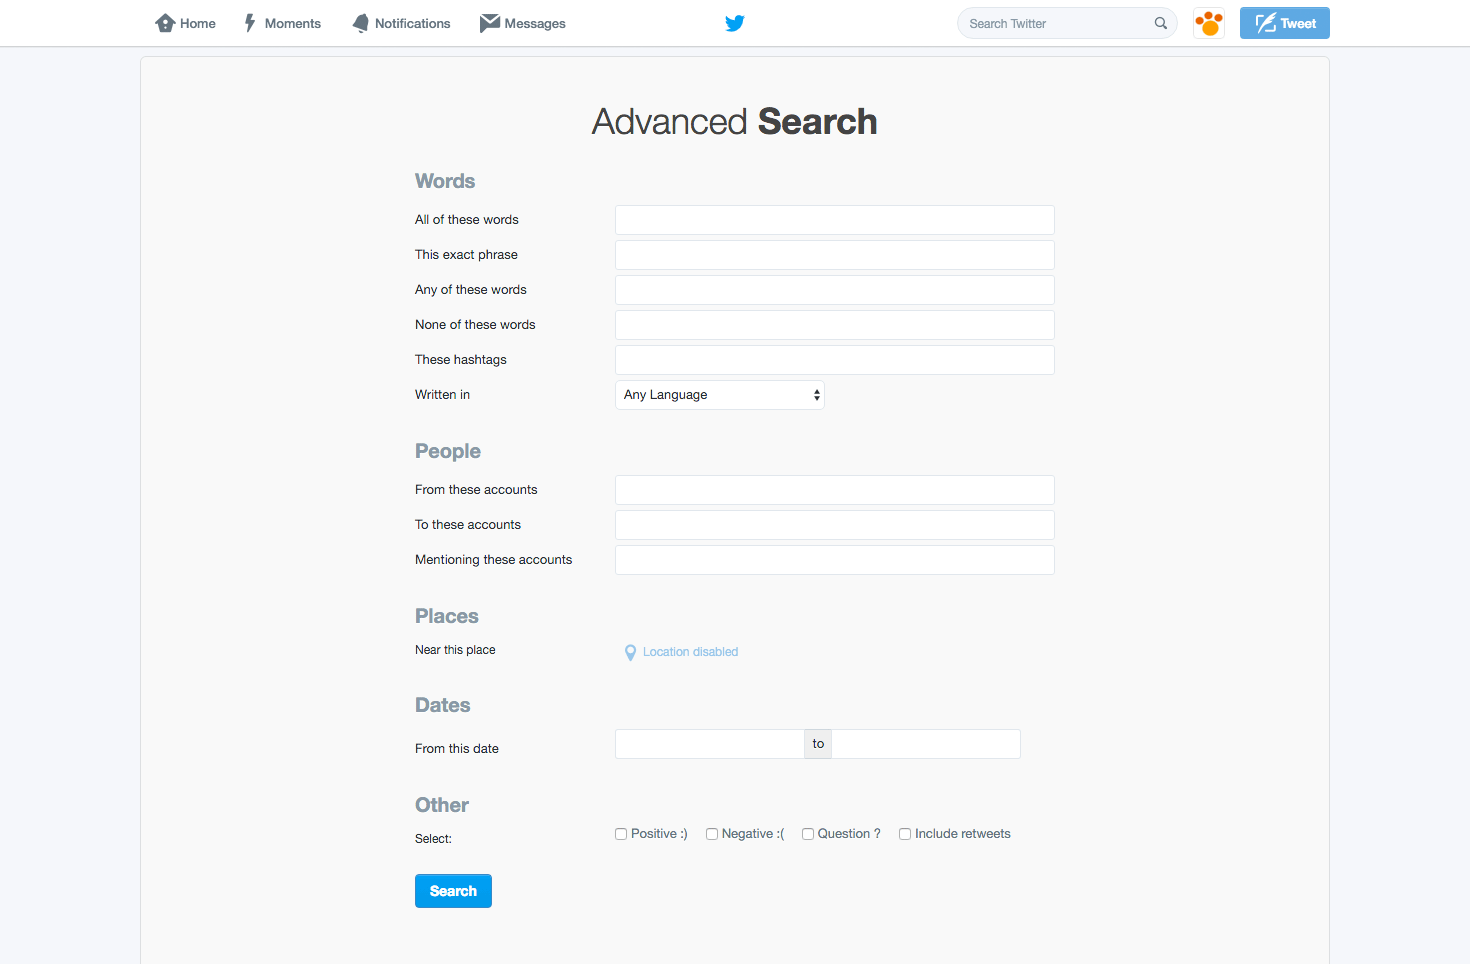 Twitter Advanced Search form